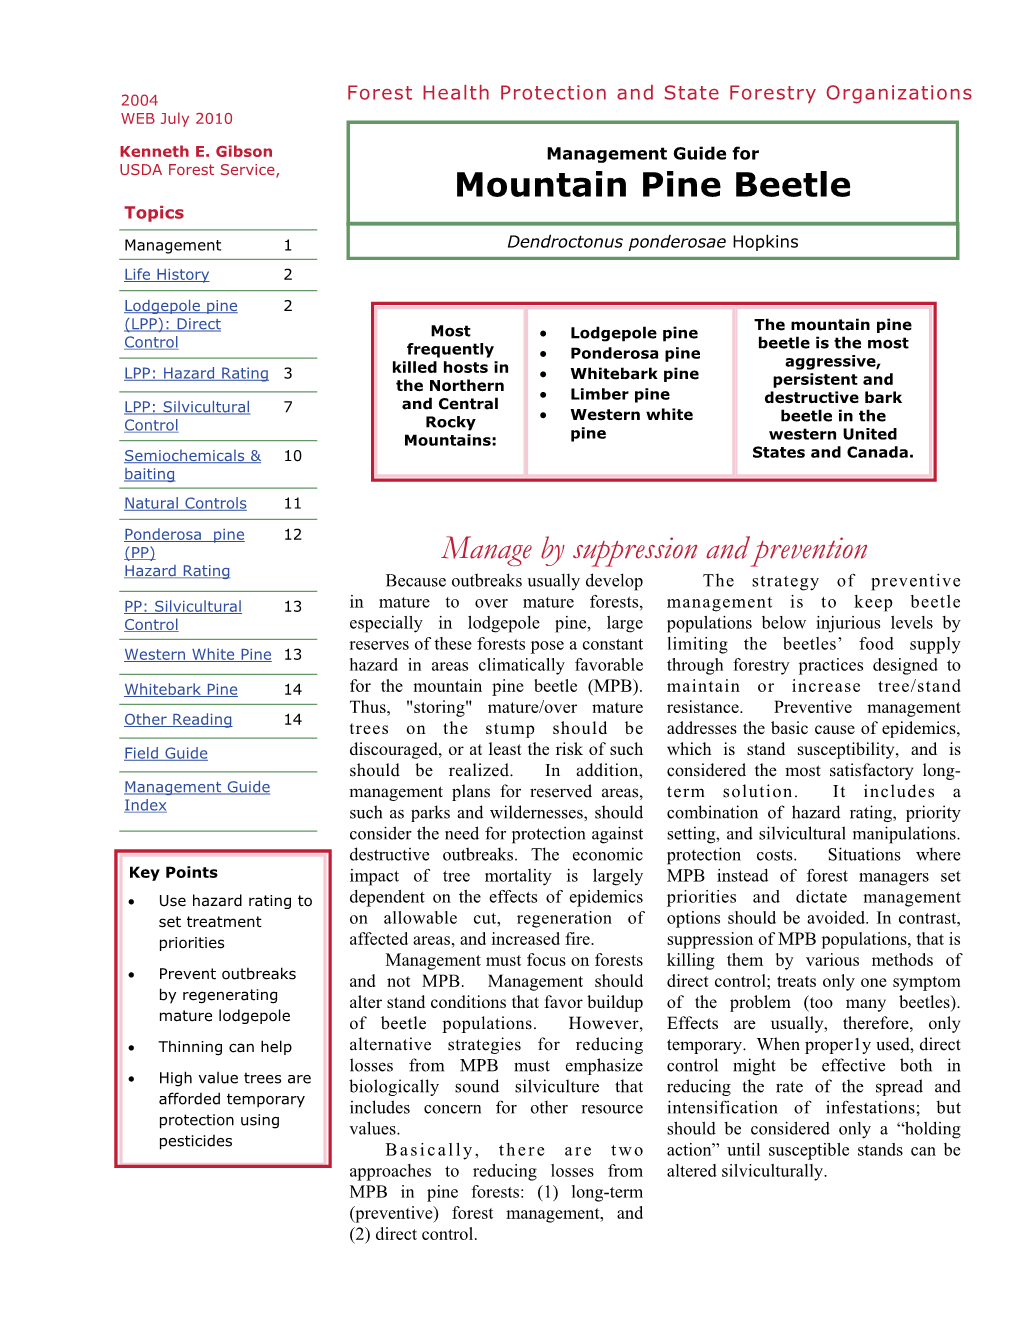 Management Guide for Mountain Pine Beetle